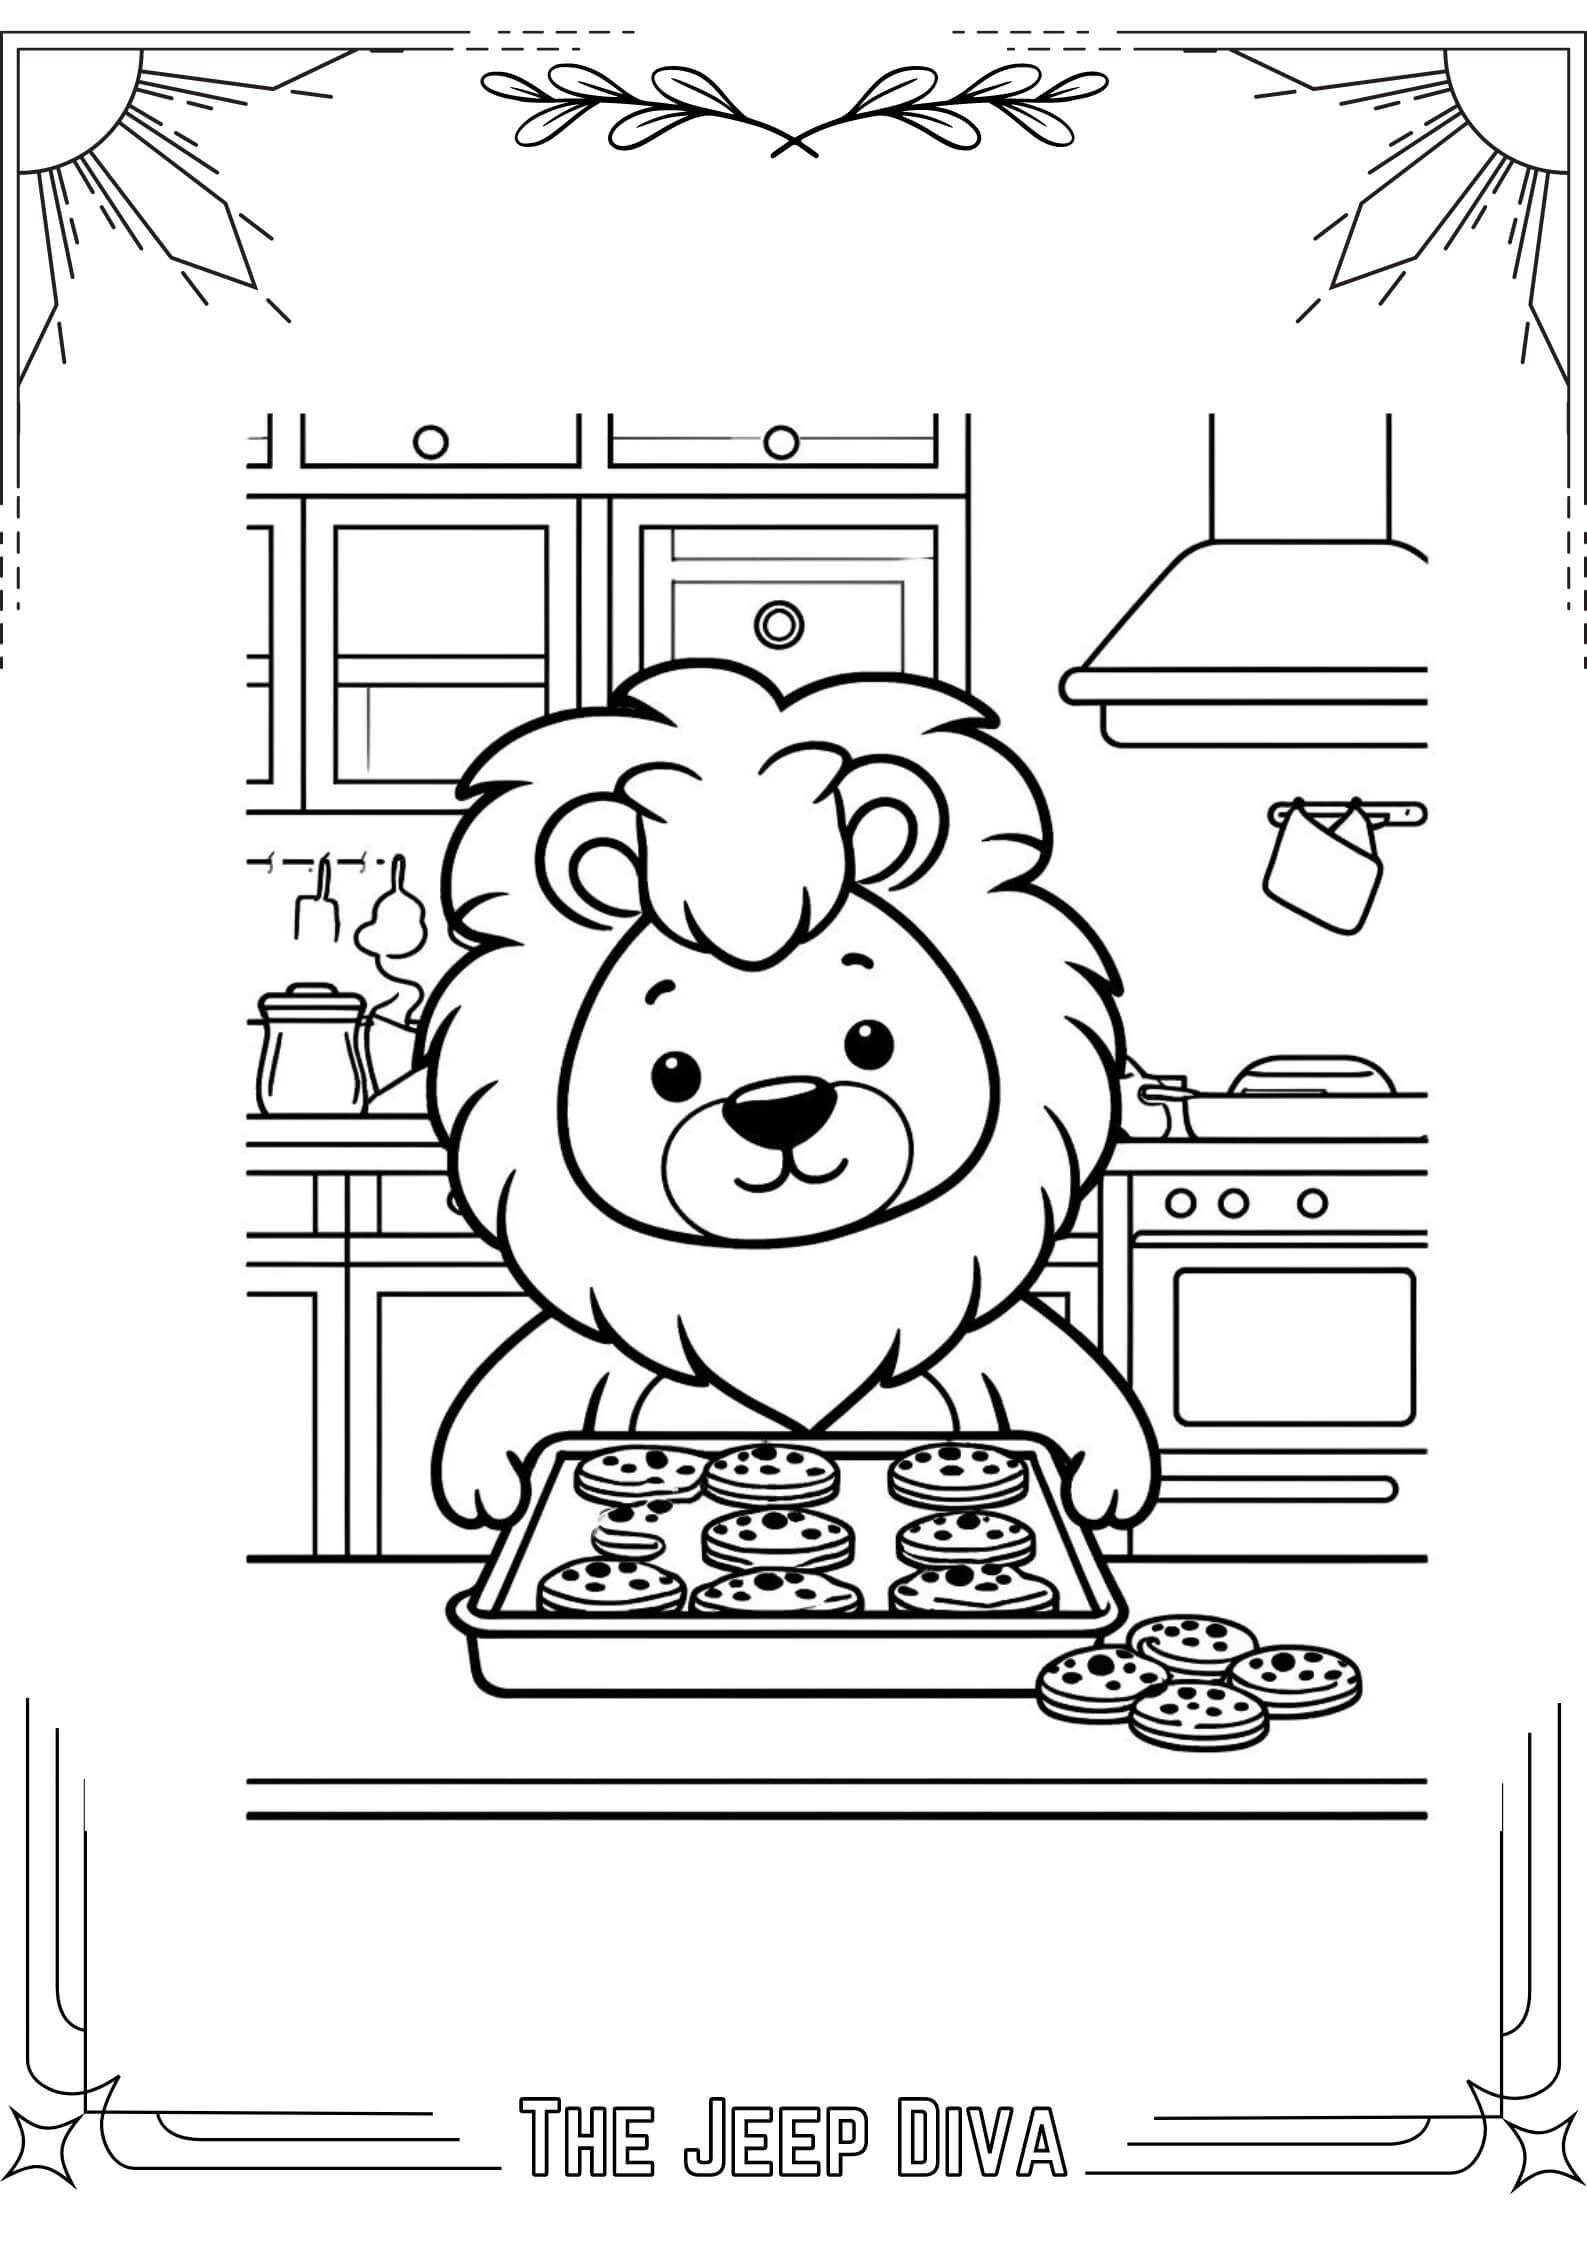 The Jeep Diva Coloring Page Lion Medium Difficulty 16